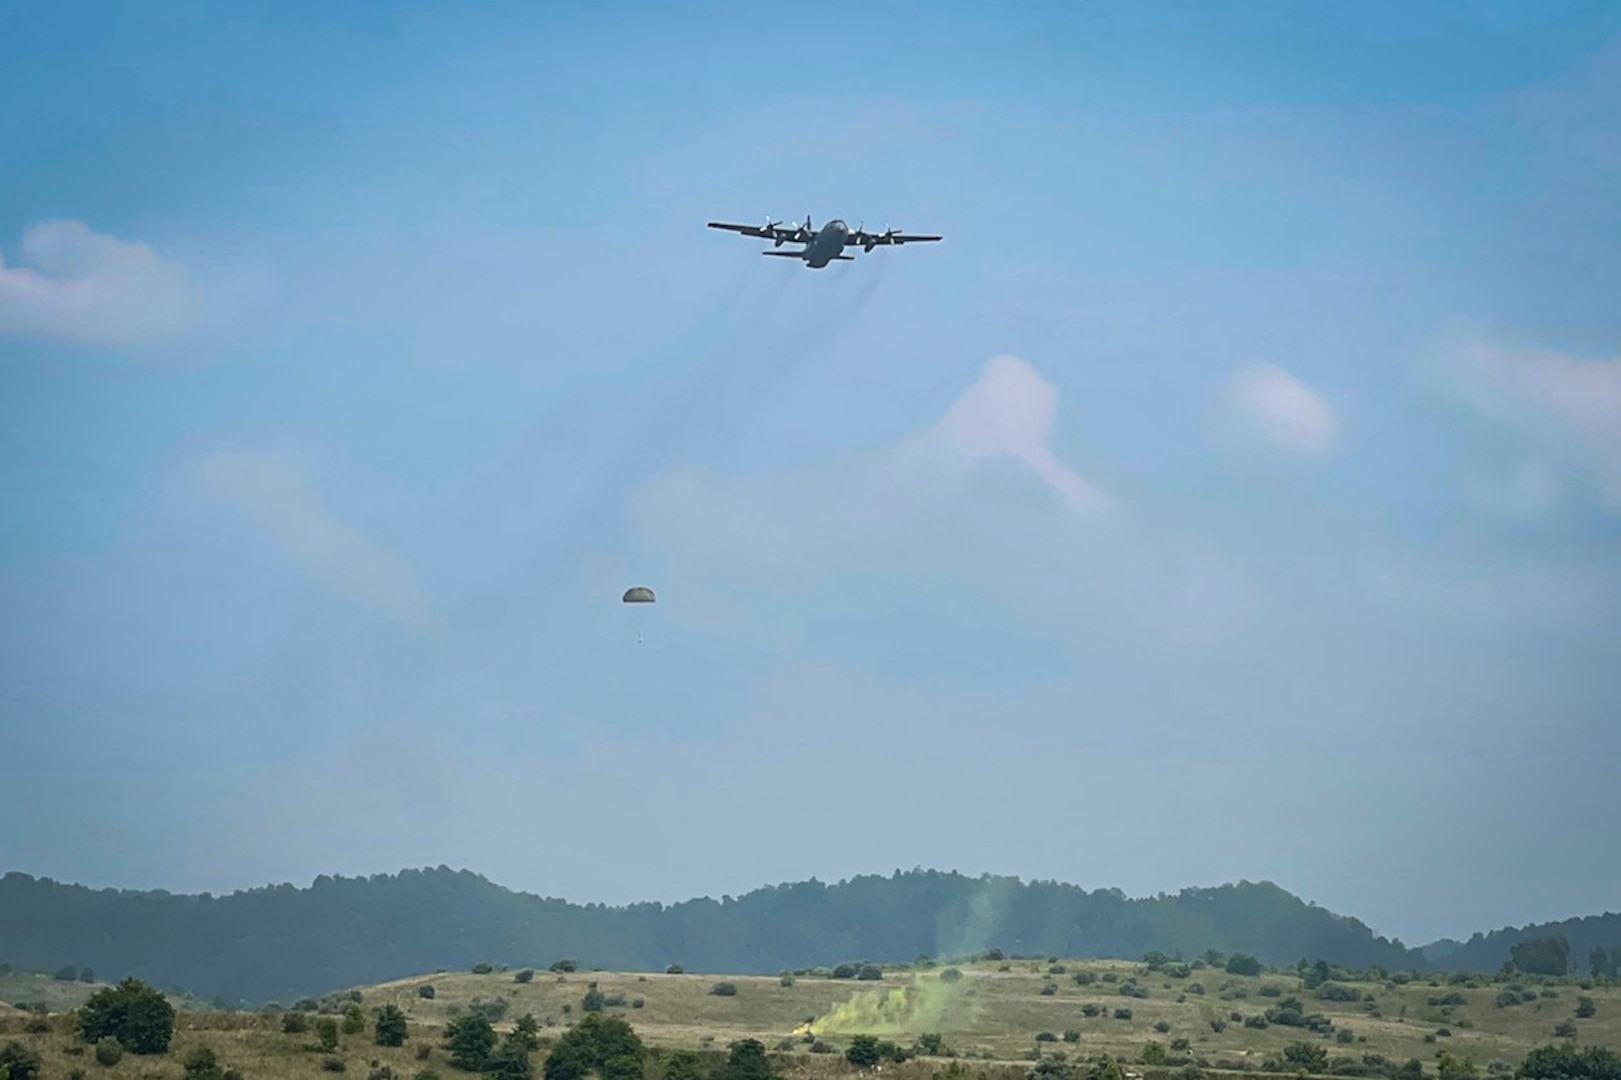 A 103rd Airlift Wing C-130H Hercules aircraft performs a Low Cost Low Altitude airdrop during Exercise Sentry Storm 2021 at Camp Branch, West Virginia, July 20, 2021. Sentry Storm is a joint training environment enabling participants to exercise their skills to prevail over near-peer competitors while applying agile combat employment concepts.